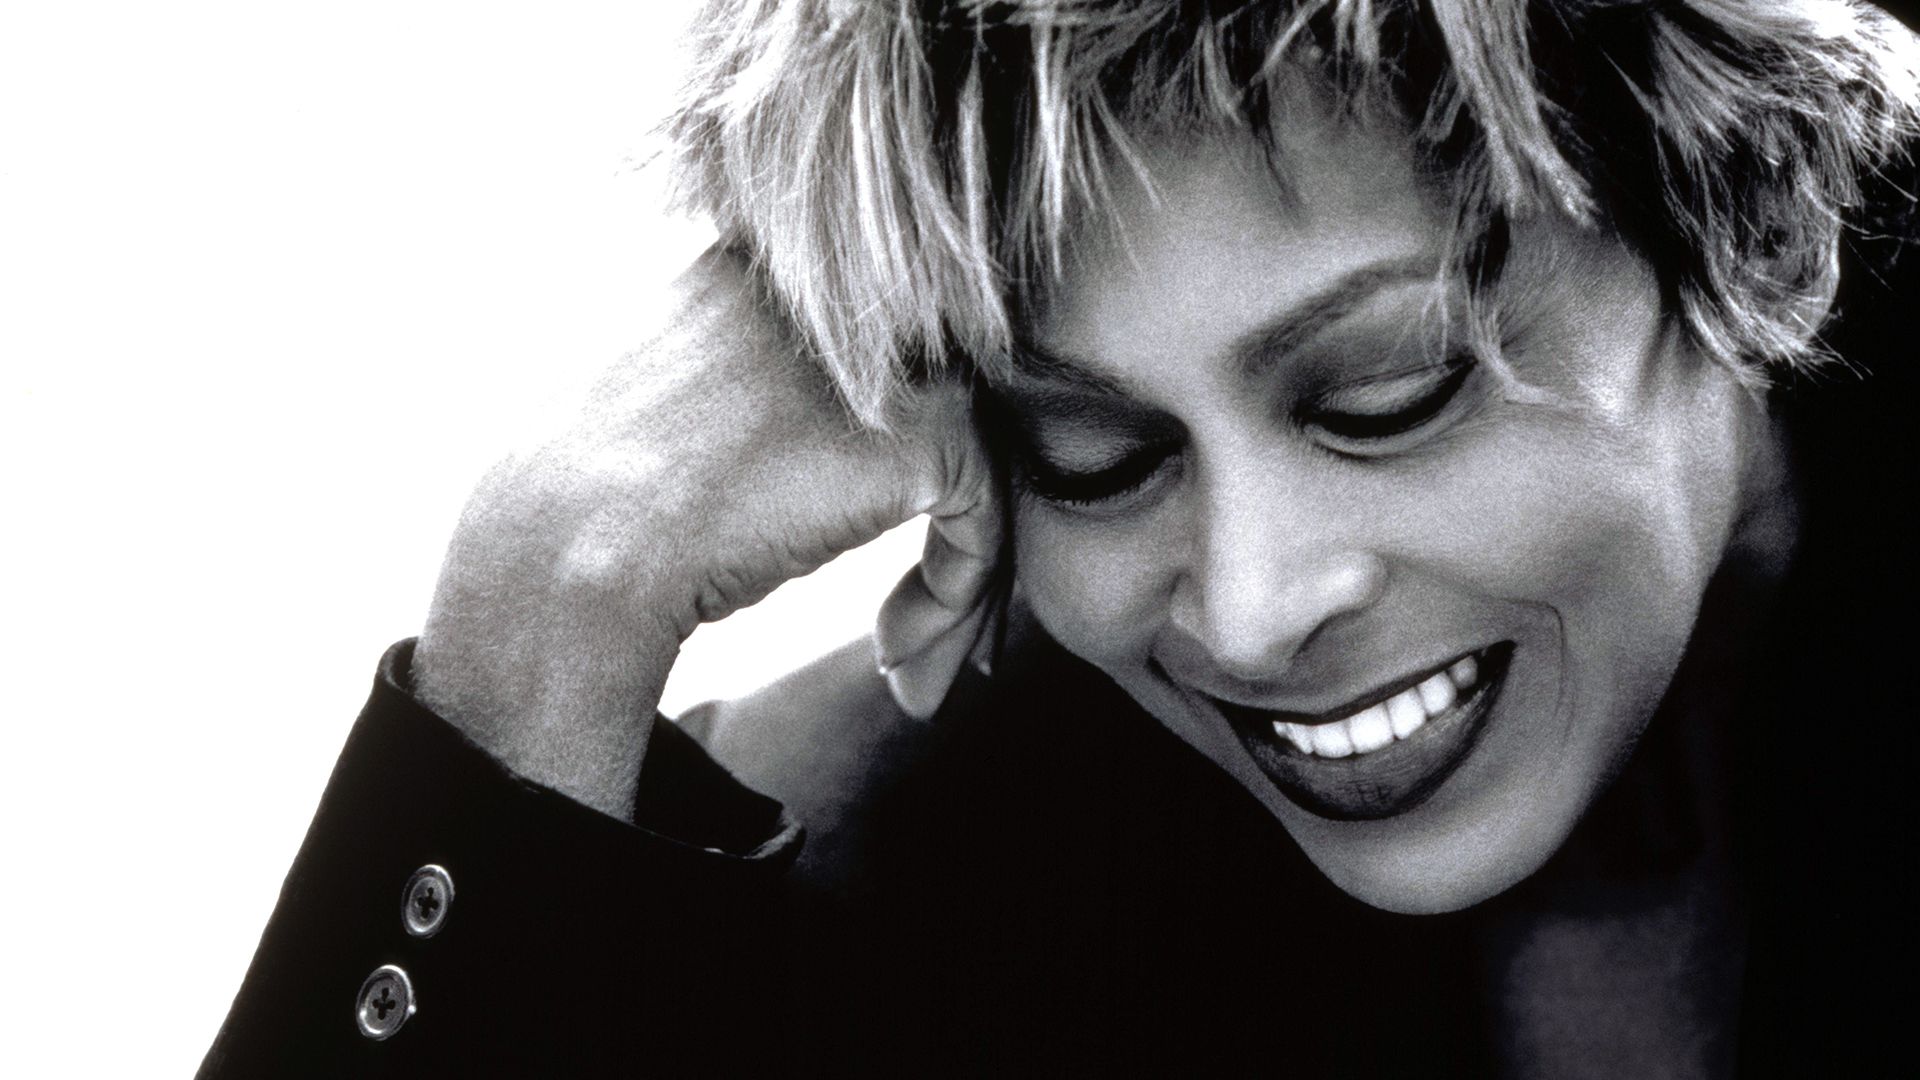 Tina Turner Wallpaper High Resolution and Quality Download